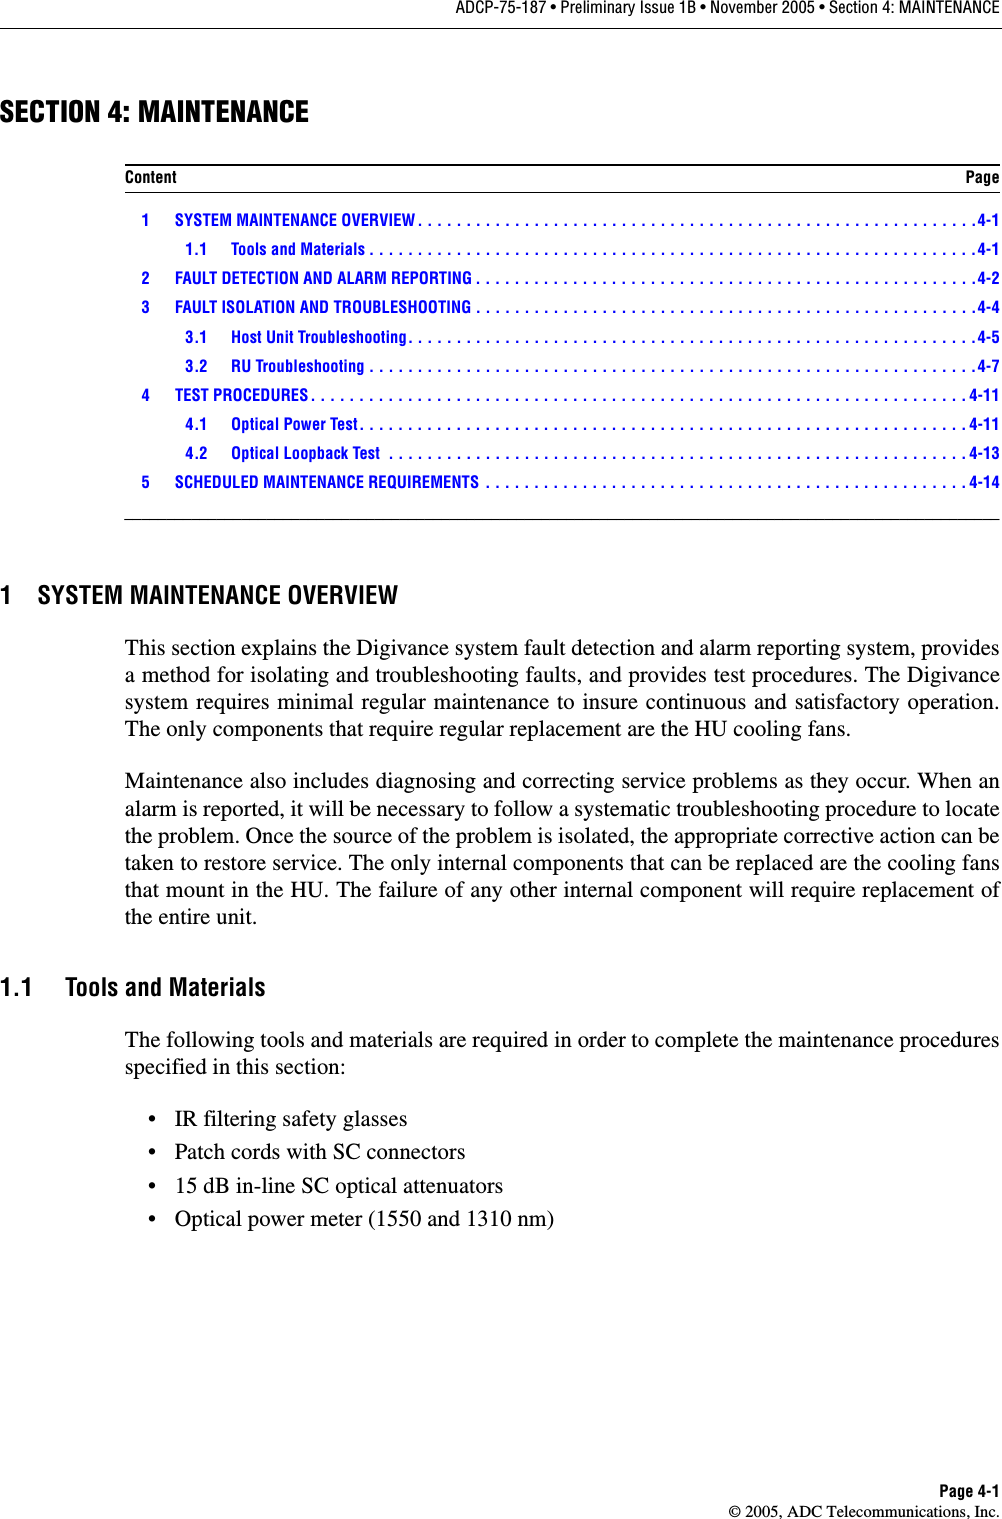 ADCP-75-187 • Preliminary Issue 1B • November 2005 • Section 4: MAINTENANCEPage 4-1© 2005, ADC Telecommunications, Inc.SECTION 4: MAINTENANCE 1 SYSTEM MAINTENANCE OVERVIEW . . . . . . . . . . . . . . . . . . . . . . . . . . . . . . . . . . . . . . . . . . . . . . . . . . . . . . . . . .4-11.1 Tools and Materials . . . . . . . . . . . . . . . . . . . . . . . . . . . . . . . . . . . . . . . . . . . . . . . . . . . . . . . . . . . . . . .4-12 FAULT DETECTION AND ALARM REPORTING . . . . . . . . . . . . . . . . . . . . . . . . . . . . . . . . . . . . . . . . . . . . . . . . . . . .4-23 FAULT ISOLATION AND TROUBLESHOOTING . . . . . . . . . . . . . . . . . . . . . . . . . . . . . . . . . . . . . . . . . . . . . . . . . . . .4-43.1 Host Unit Troubleshooting. . . . . . . . . . . . . . . . . . . . . . . . . . . . . . . . . . . . . . . . . . . . . . . . . . . . . . . . . . .4-53.2 RU Troubleshooting . . . . . . . . . . . . . . . . . . . . . . . . . . . . . . . . . . . . . . . . . . . . . . . . . . . . . . . . . . . . . . .4-74 TEST PROCEDURES . . . . . . . . . . . . . . . . . . . . . . . . . . . . . . . . . . . . . . . . . . . . . . . . . . . . . . . . . . . . . . . . . . . . 4-114.1 Optical Power Test. . . . . . . . . . . . . . . . . . . . . . . . . . . . . . . . . . . . . . . . . . . . . . . . . . . . . . . . . . . . . . . 4-114.2 Optical Loopback Test  . . . . . . . . . . . . . . . . . . . . . . . . . . . . . . . . . . . . . . . . . . . . . . . . . . . . . . . . . . . . 4-135 SCHEDULED MAINTENANCE REQUIREMENTS . . . . . . . . . . . . . . . . . . . . . . . . . . . . . . . . . . . . . . . . . . . . . . . . . . 4-14_________________________________________________________________________________________________________1 SYSTEM MAINTENANCE OVERVIEWThis section explains the Digivance system fault detection and alarm reporting system, providesa method for isolating and troubleshooting faults, and provides test procedures. The Digivancesystem requires minimal regular maintenance to insure continuous and satisfactory operation.The only components that require regular replacement are the HU cooling fans.Maintenance also includes diagnosing and correcting service problems as they occur. When analarm is reported, it will be necessary to follow a systematic troubleshooting procedure to locatethe problem. Once the source of the problem is isolated, the appropriate corrective action can betaken to restore service. The only internal components that can be replaced are the cooling fansthat mount in the HU. The failure of any other internal component will require replacement ofthe entire unit. 1.1 Tools and MaterialsThe following tools and materials are required in order to complete the maintenance proceduresspecified in this section: • IR filtering safety glasses• Patch cords with SC connectors• 15 dB in-line SC optical attenuators• Optical power meter (1550 and 1310 nm)Content Page